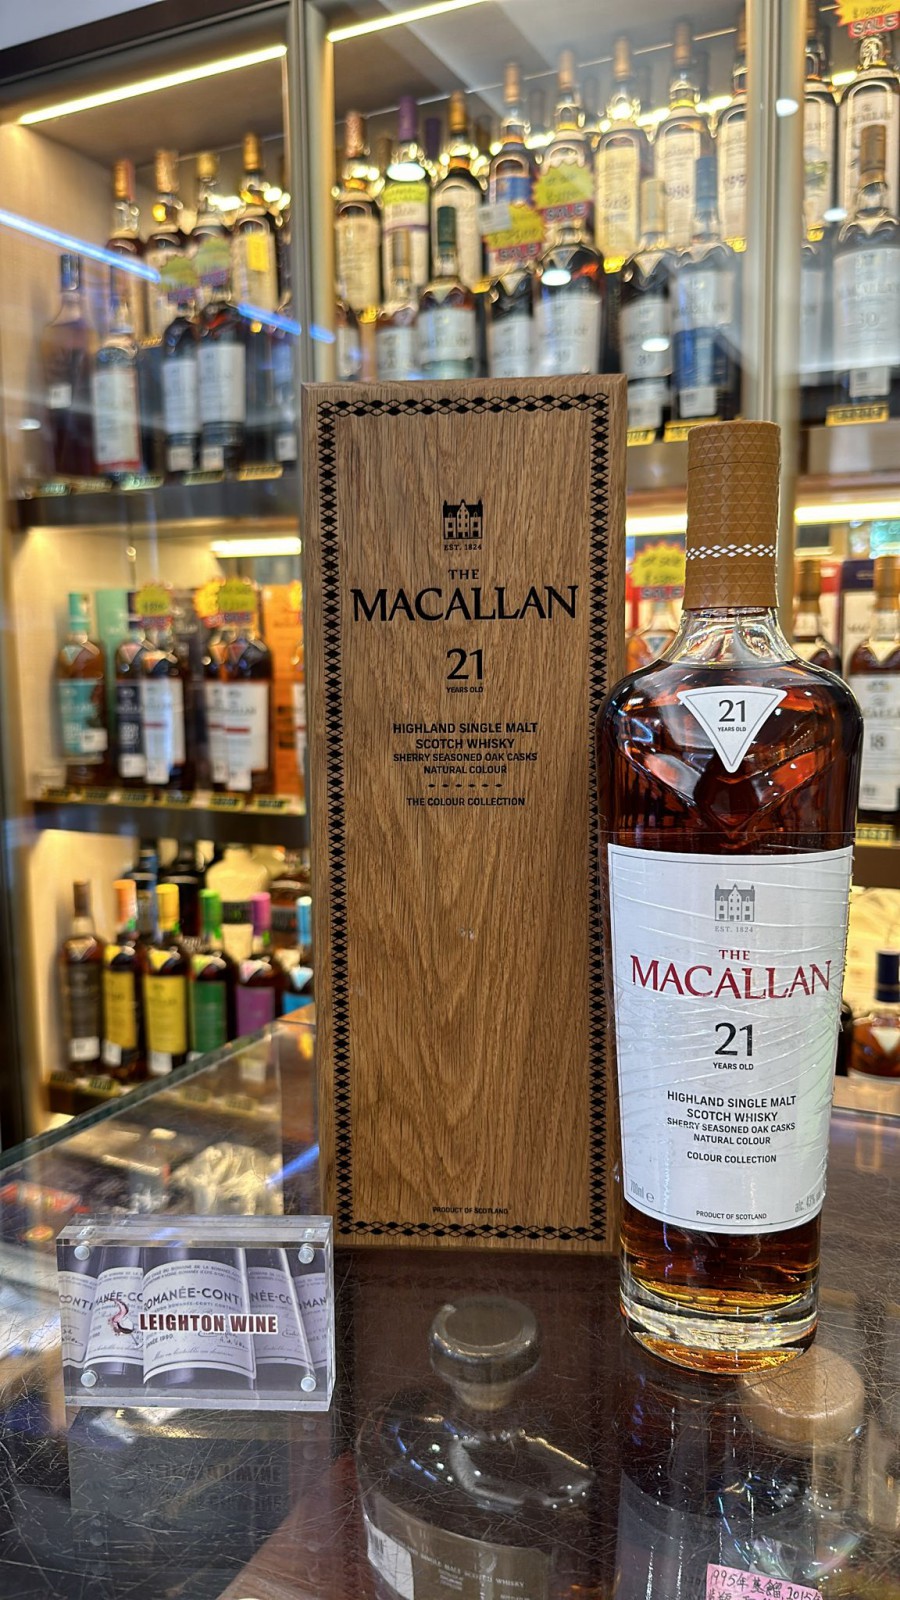 Macallan Colour Collection 21 Years Old 700mL